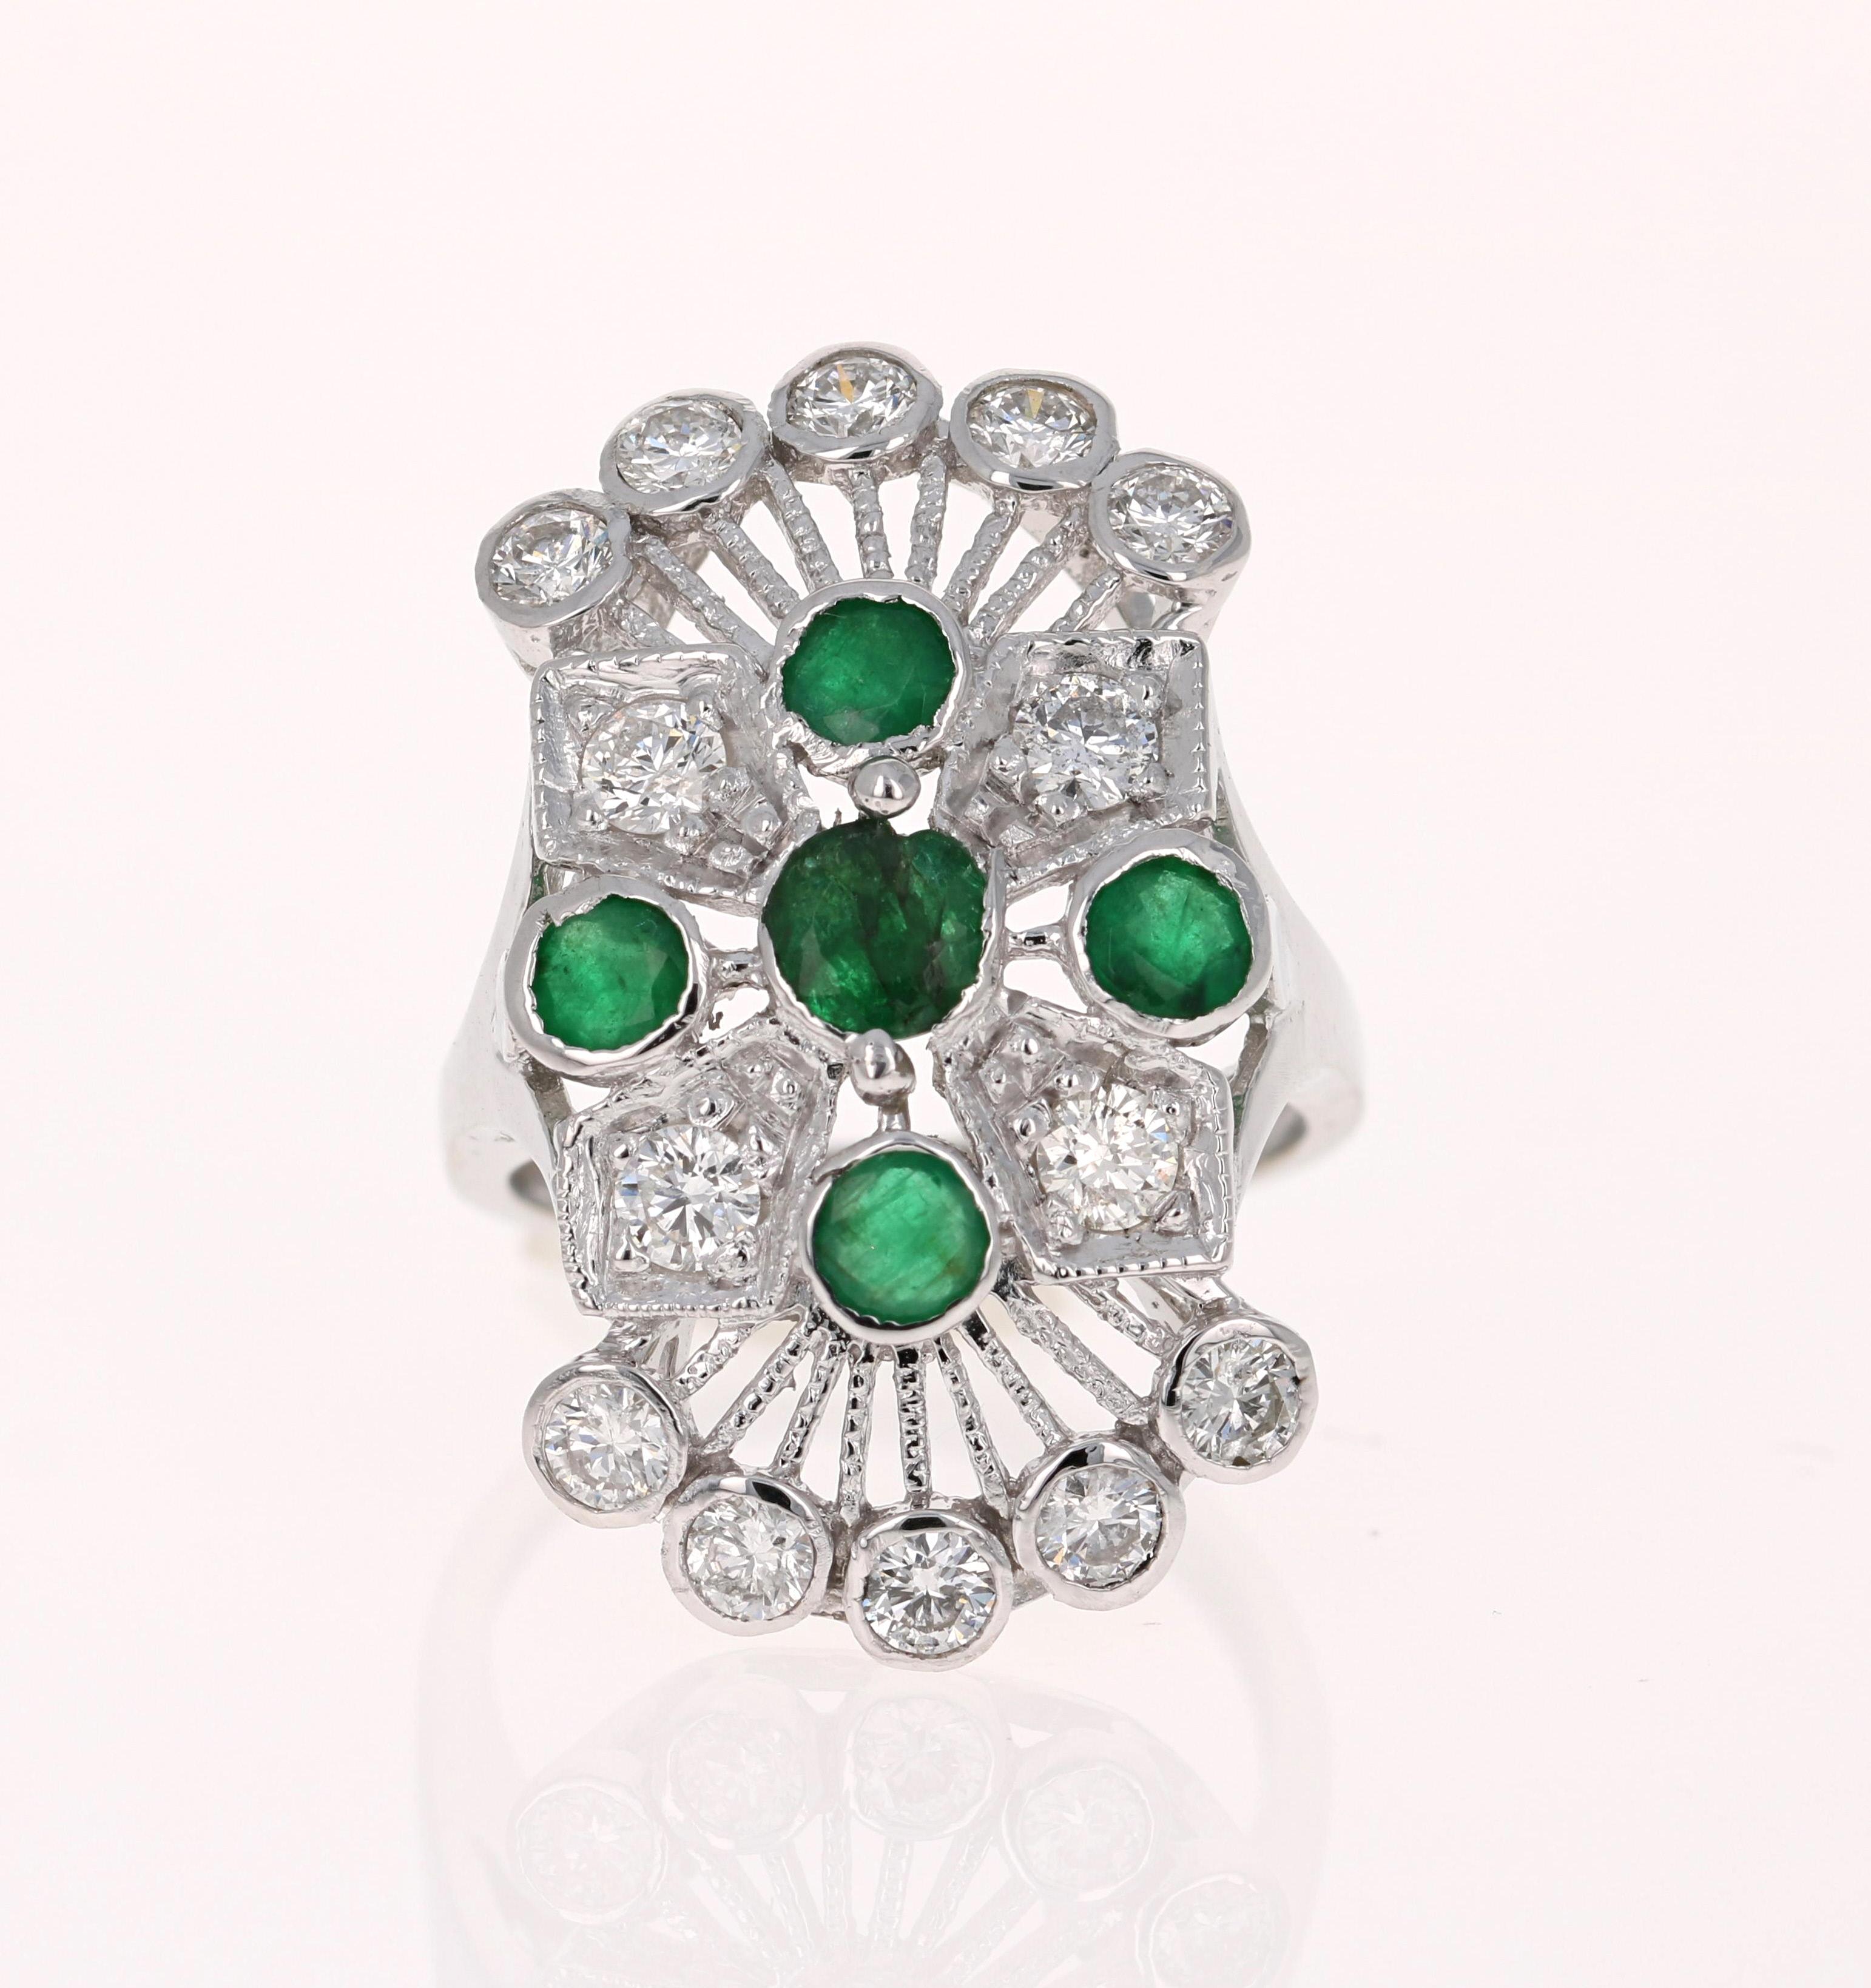 2.85 Carat Emerald and Diamond 14 Karat White Gold Cocktail Ring
6 Round Cut Emeralds weighing 1.52 Carats.
14 Round Cut Diamonds weighing 1.33 Carats (Clarity: SI2, Color: F)
14K White Gold weighing approximately 8.8 Grams
Total Carat Weight is